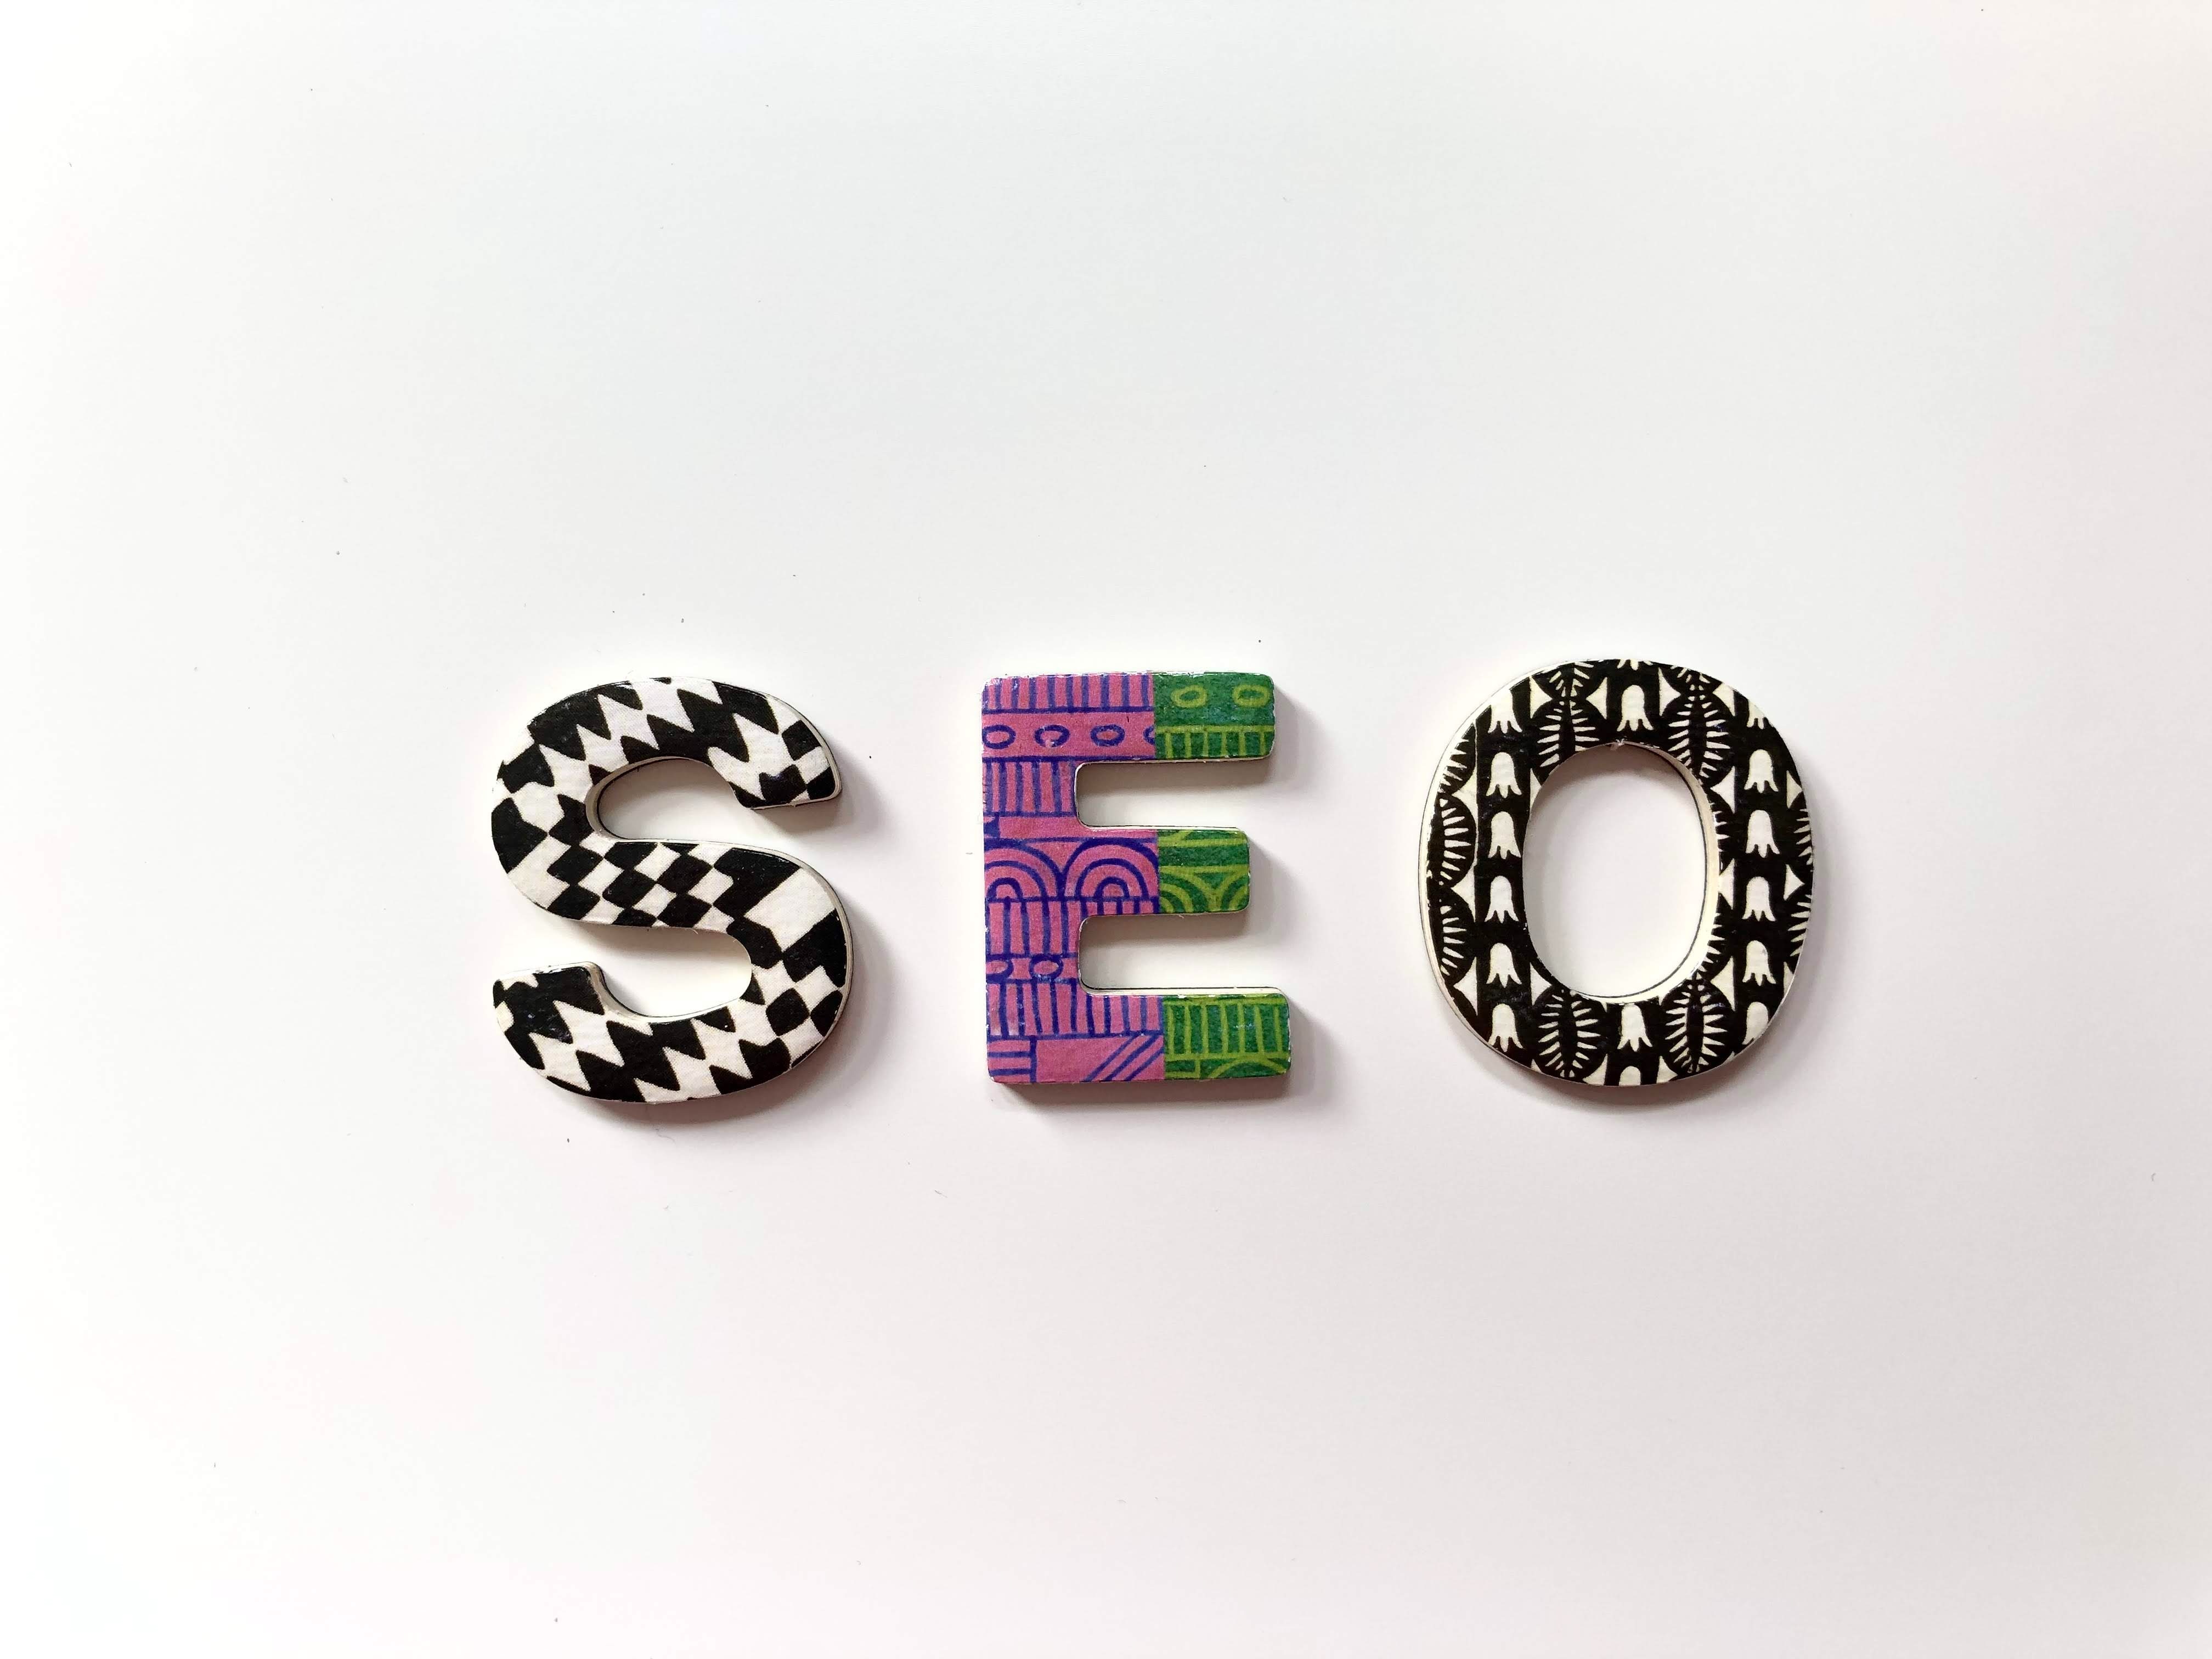 What is the role of SEO in Digital Marketing?